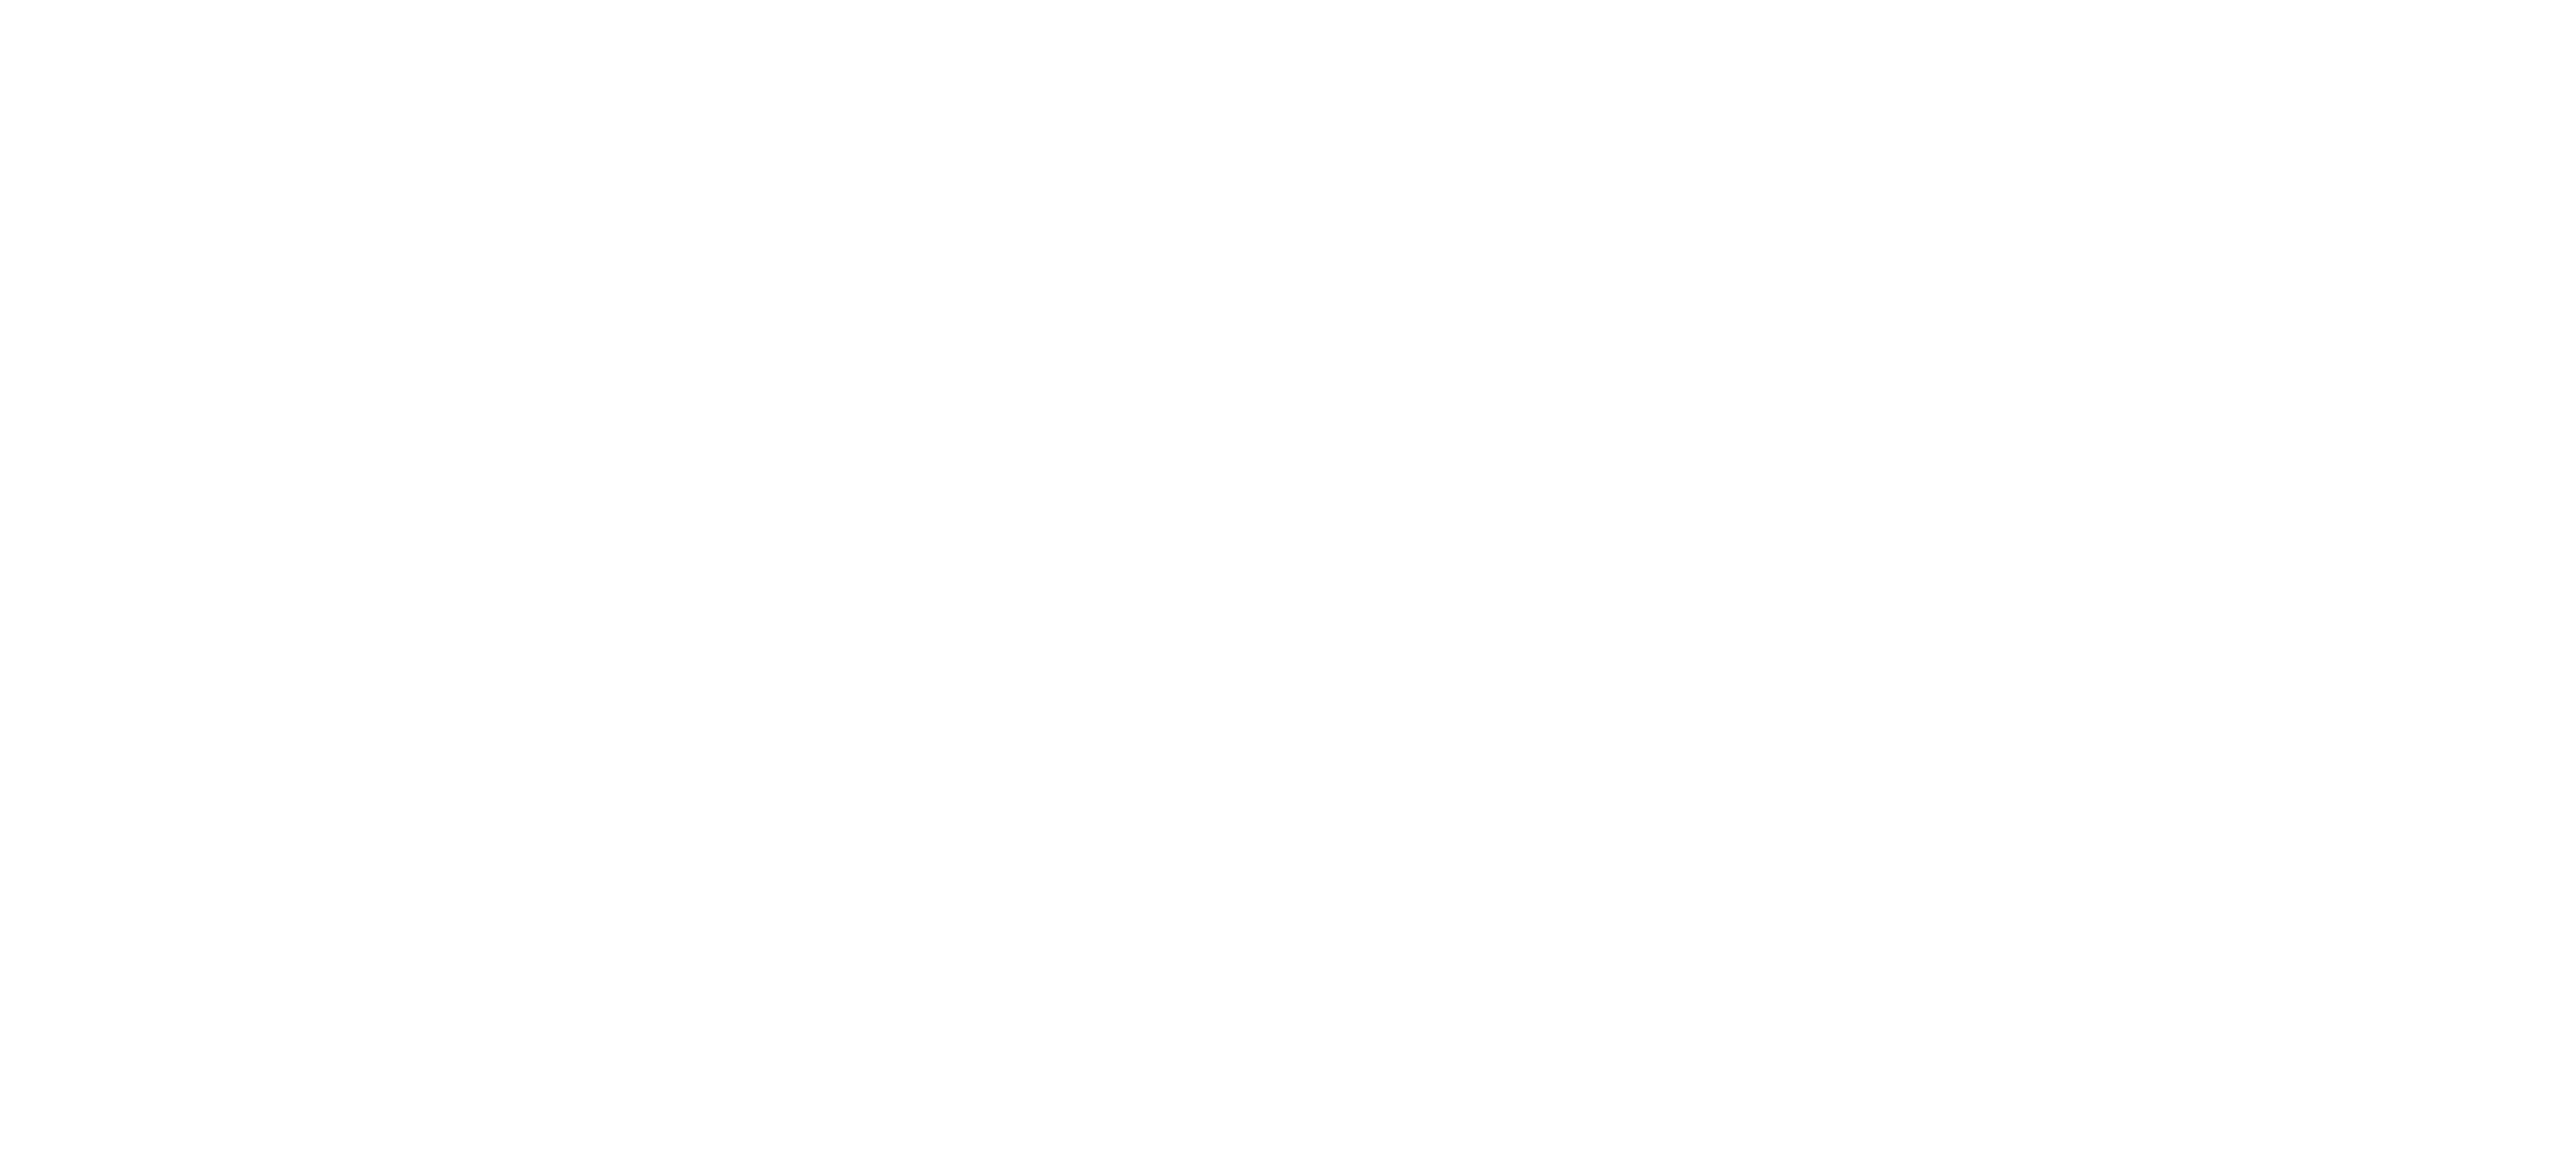 Shiken - The All In One Learning App